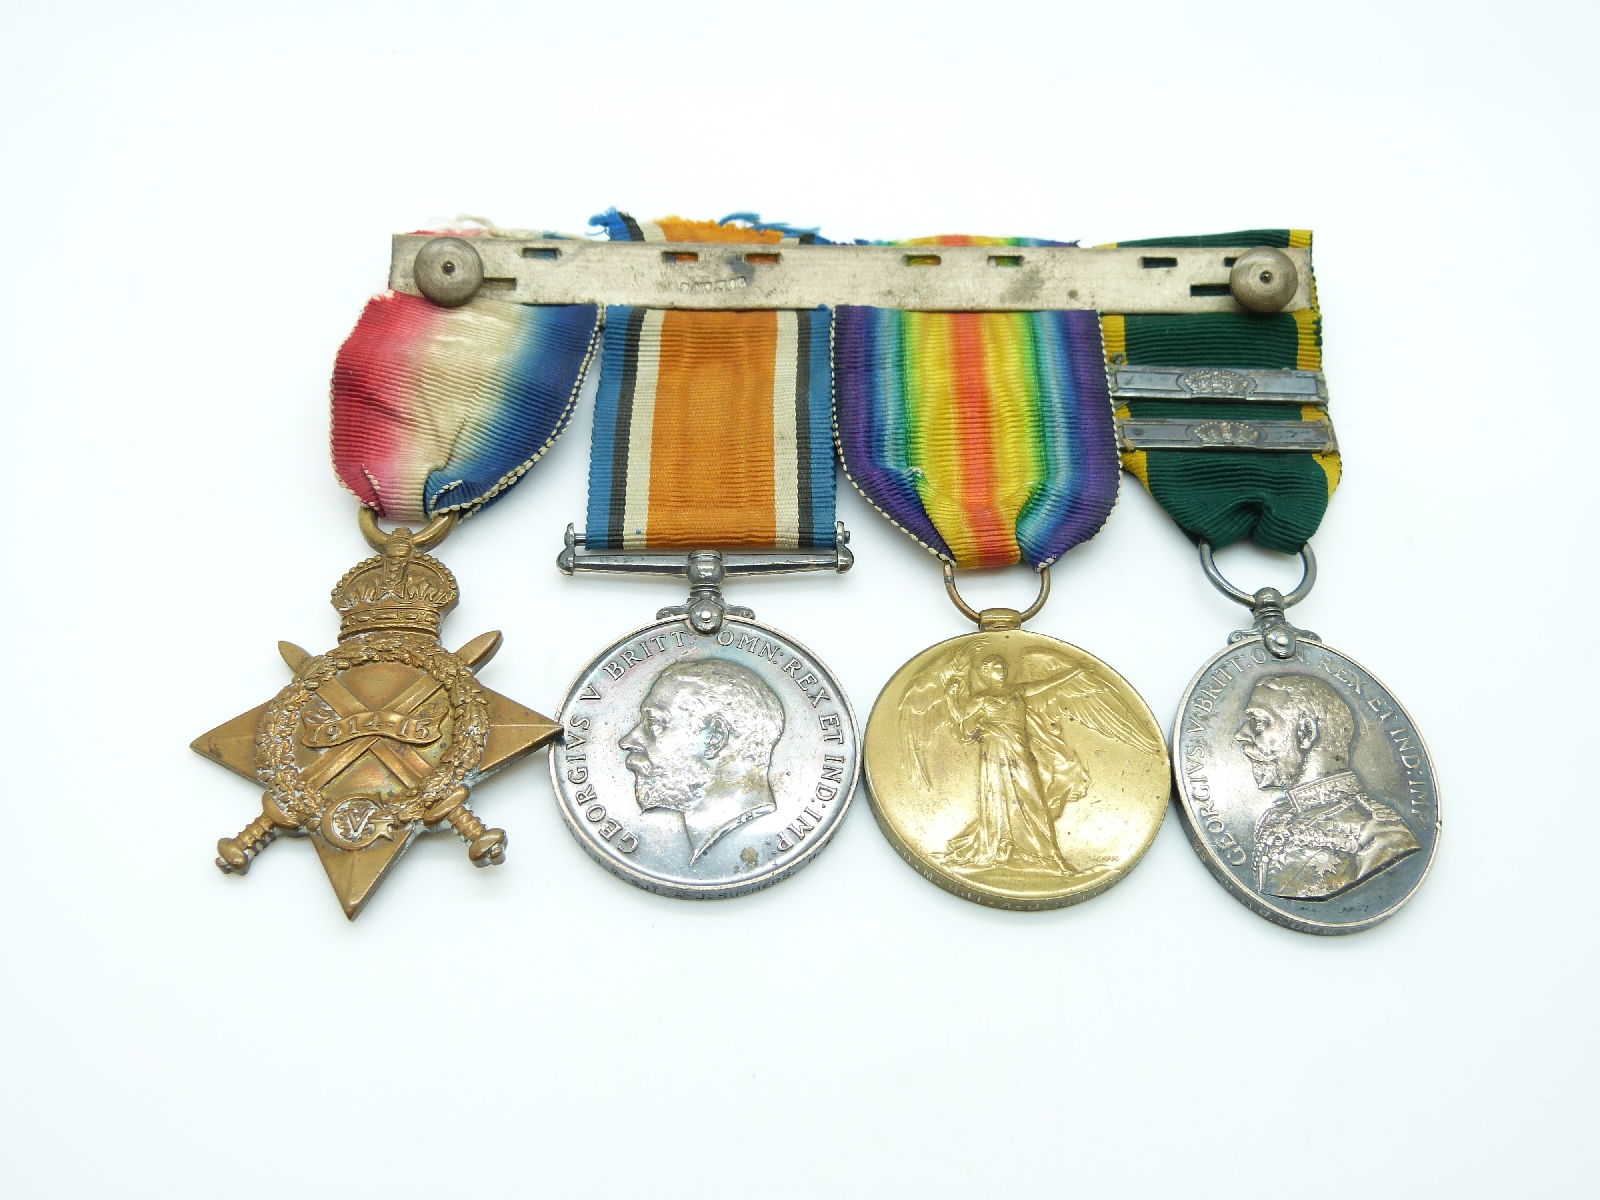 British Army WWI medals comprising 1914/1915 Star, War Medal, Victory Medal and Territorial Force